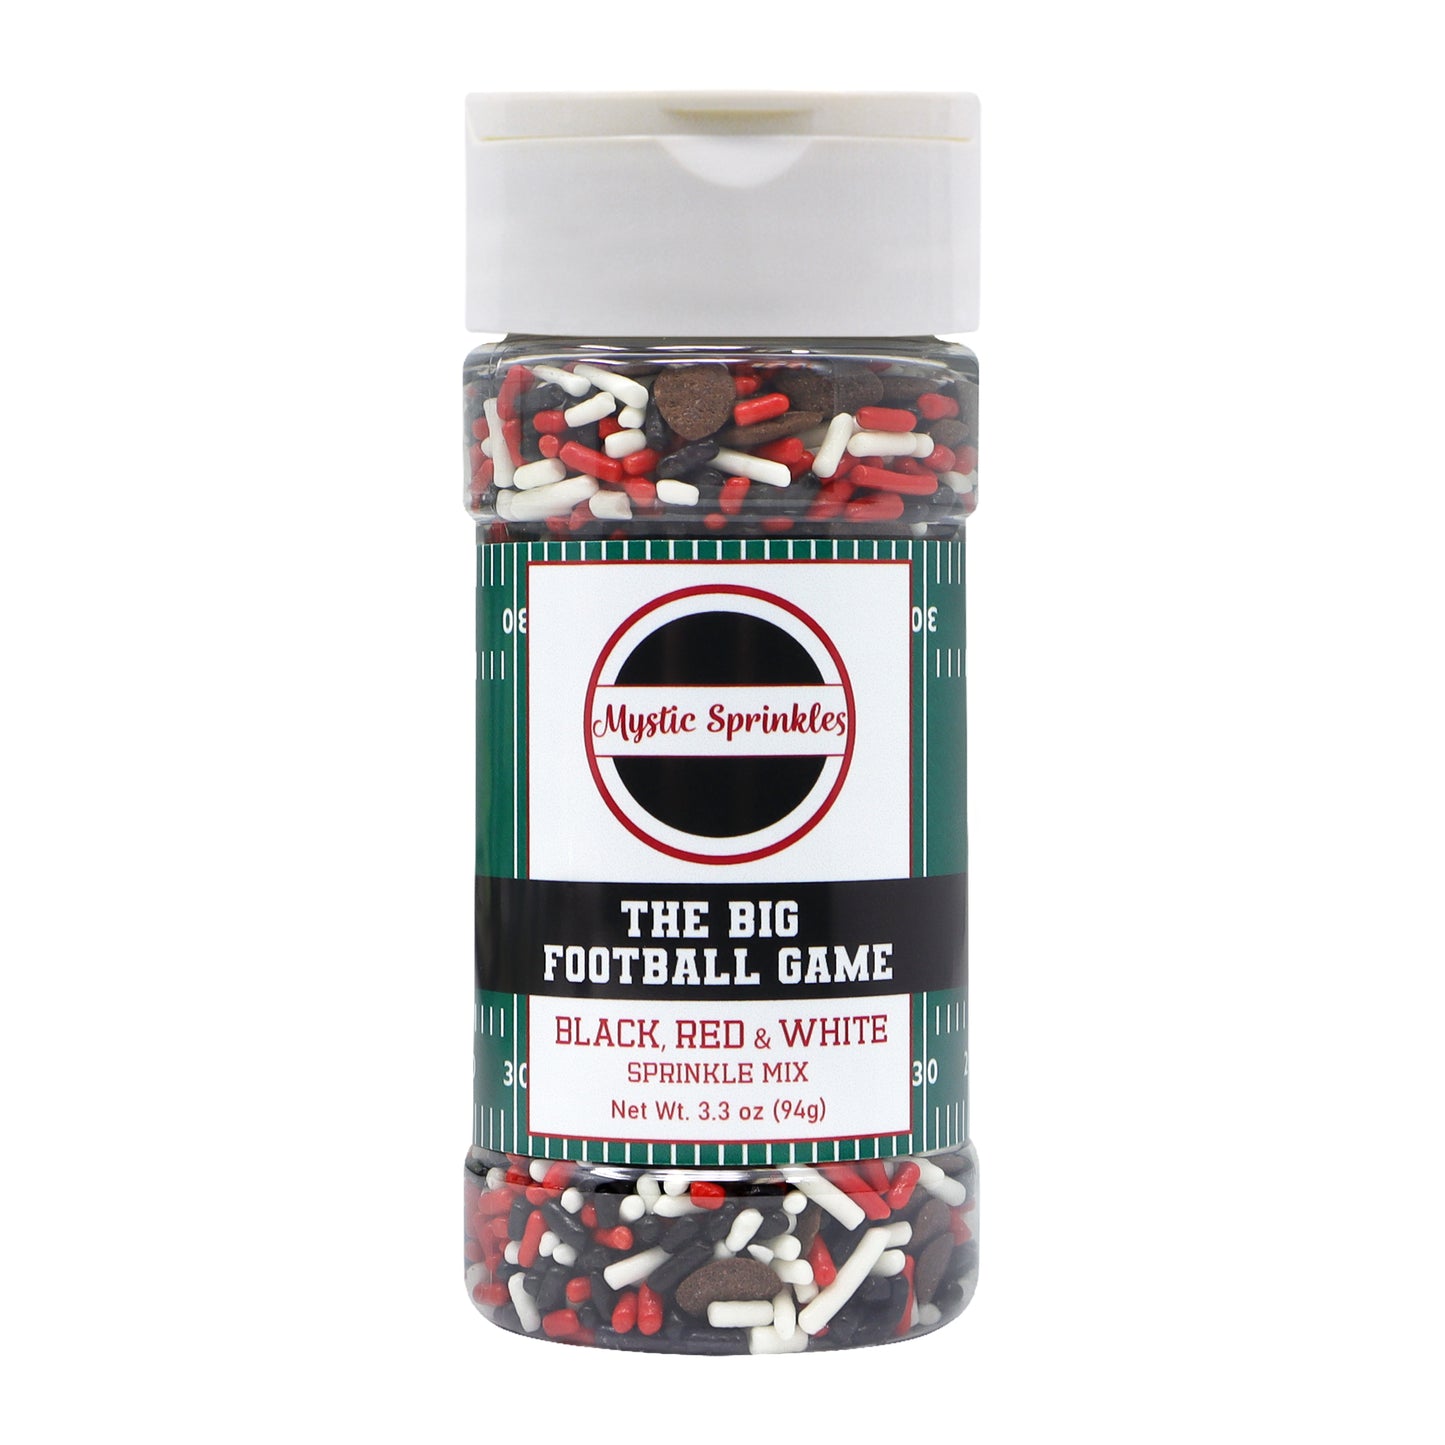 The Big Football Game Black, Red & White Jimmy Mix 3oz Bottle